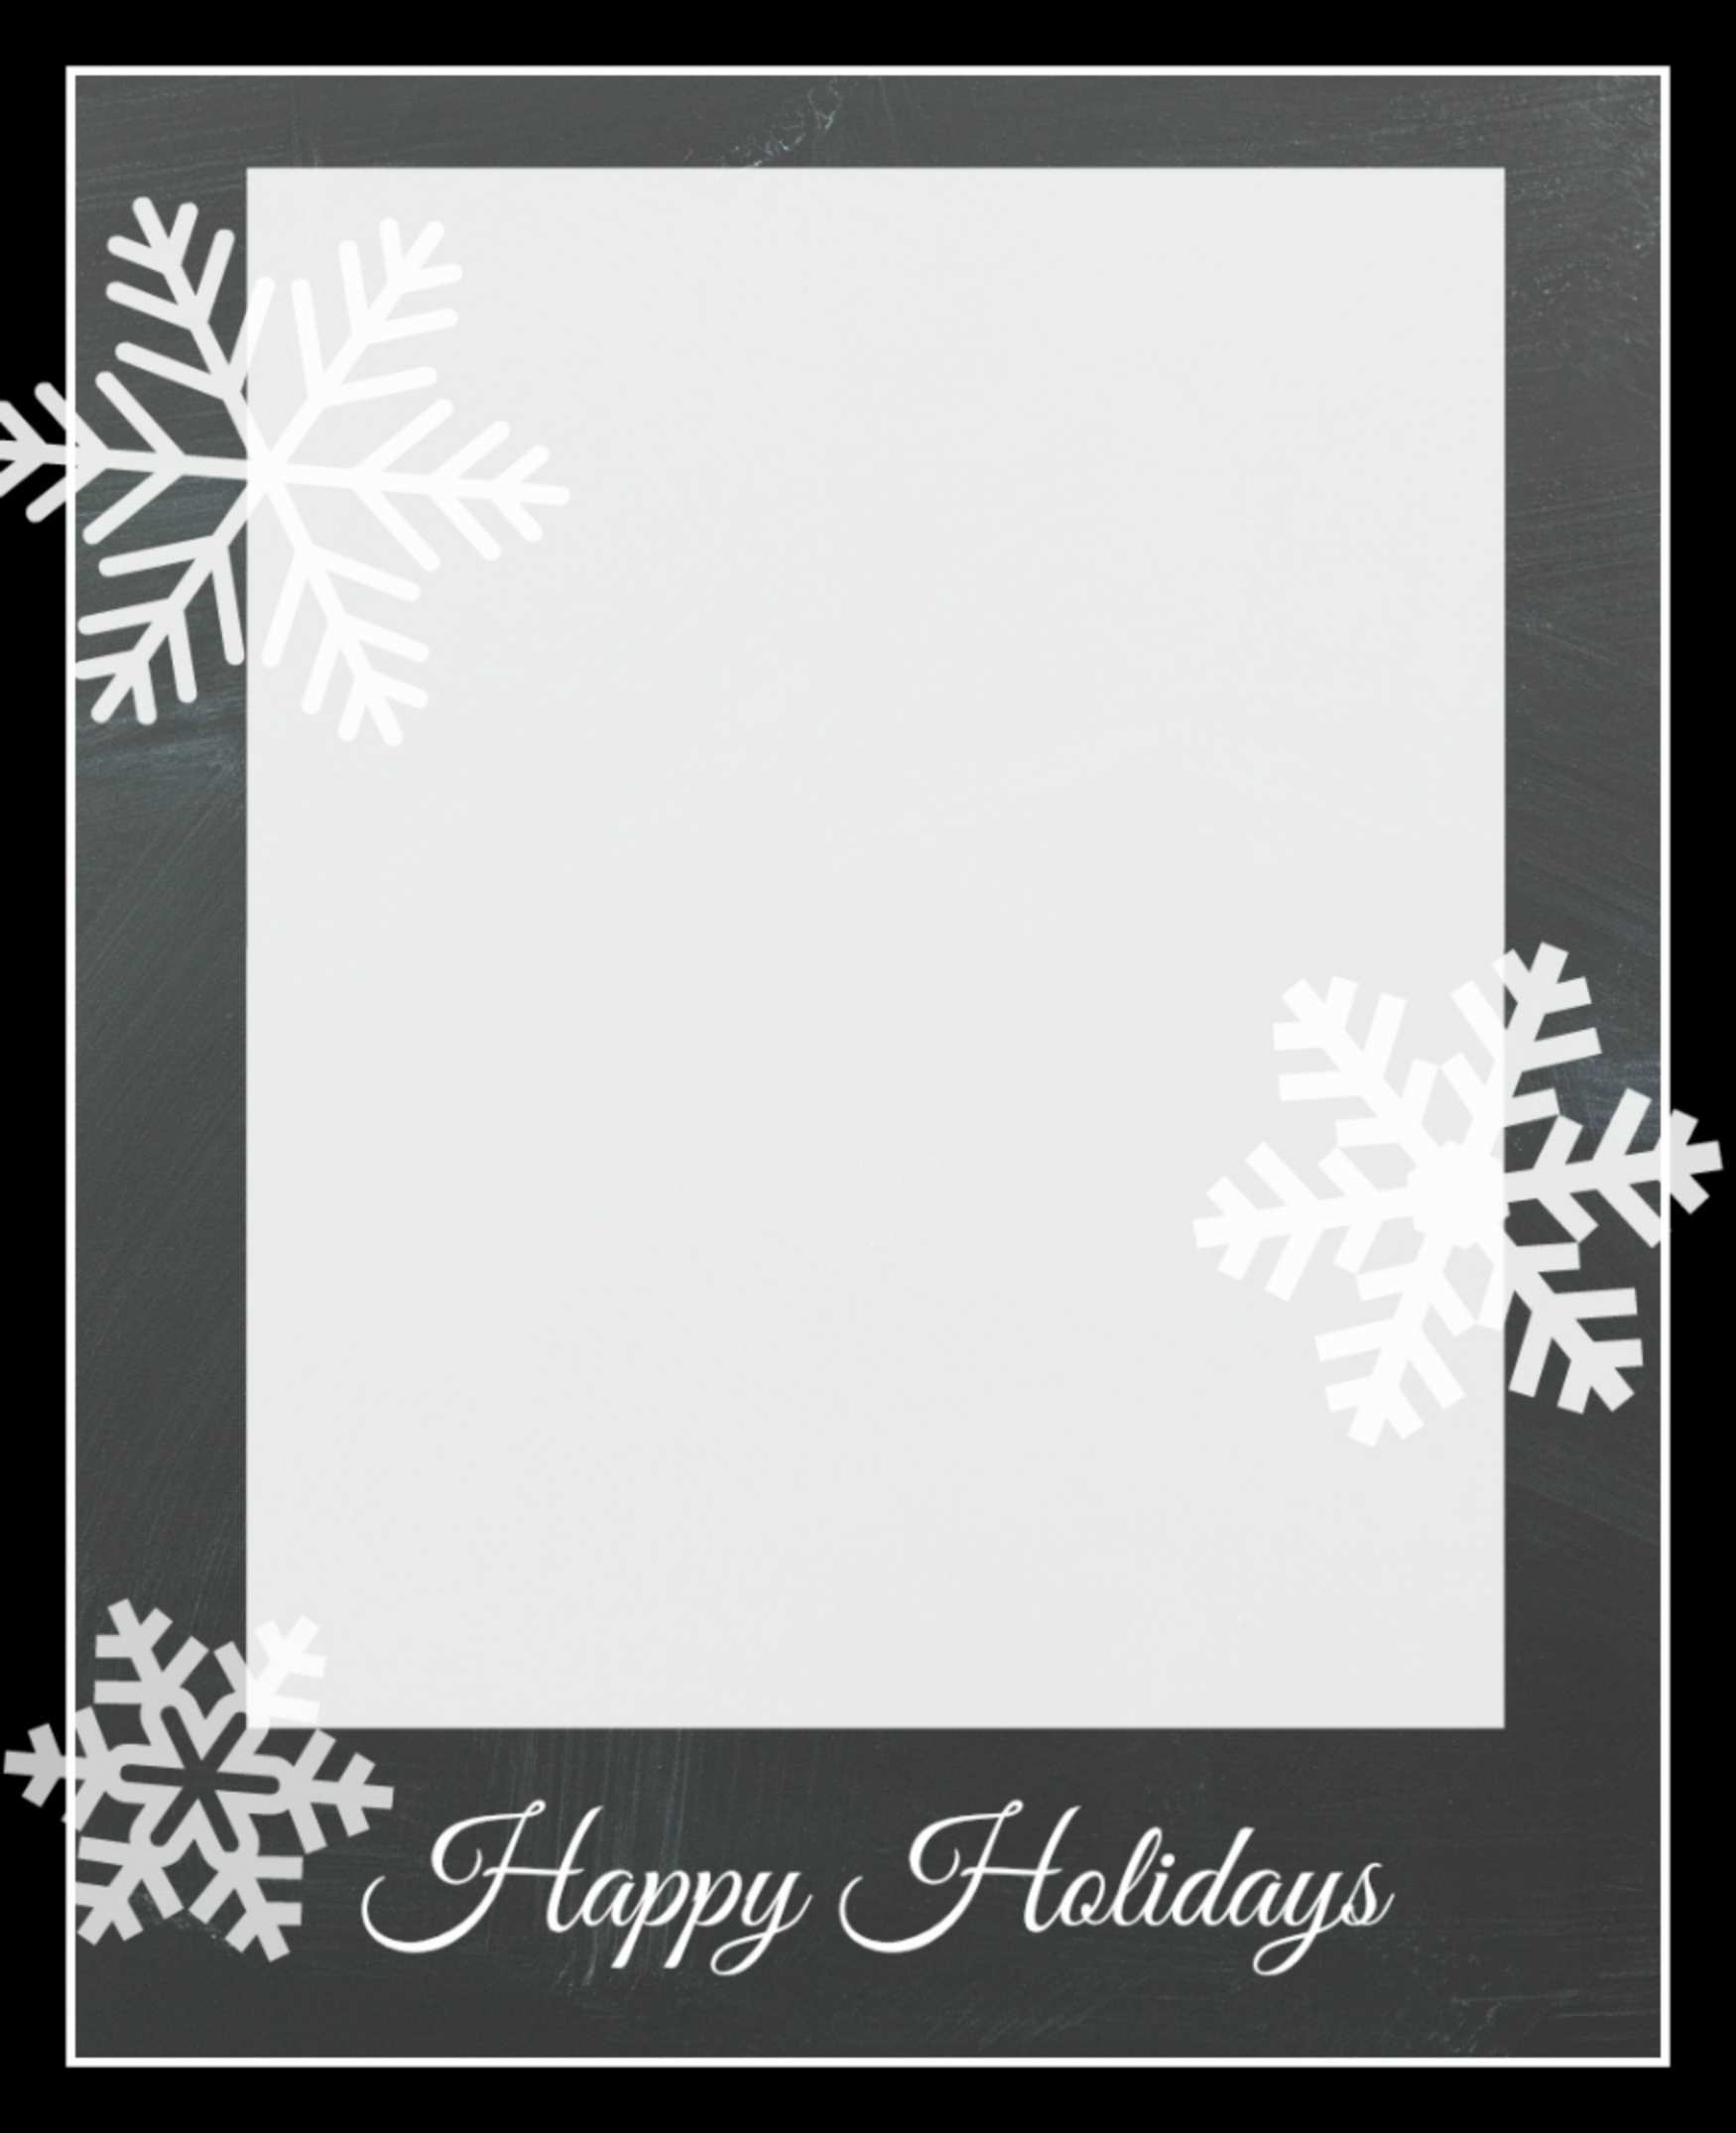 19 How To Create X Mas Card Template With Stunning Design for X Mas Card Template